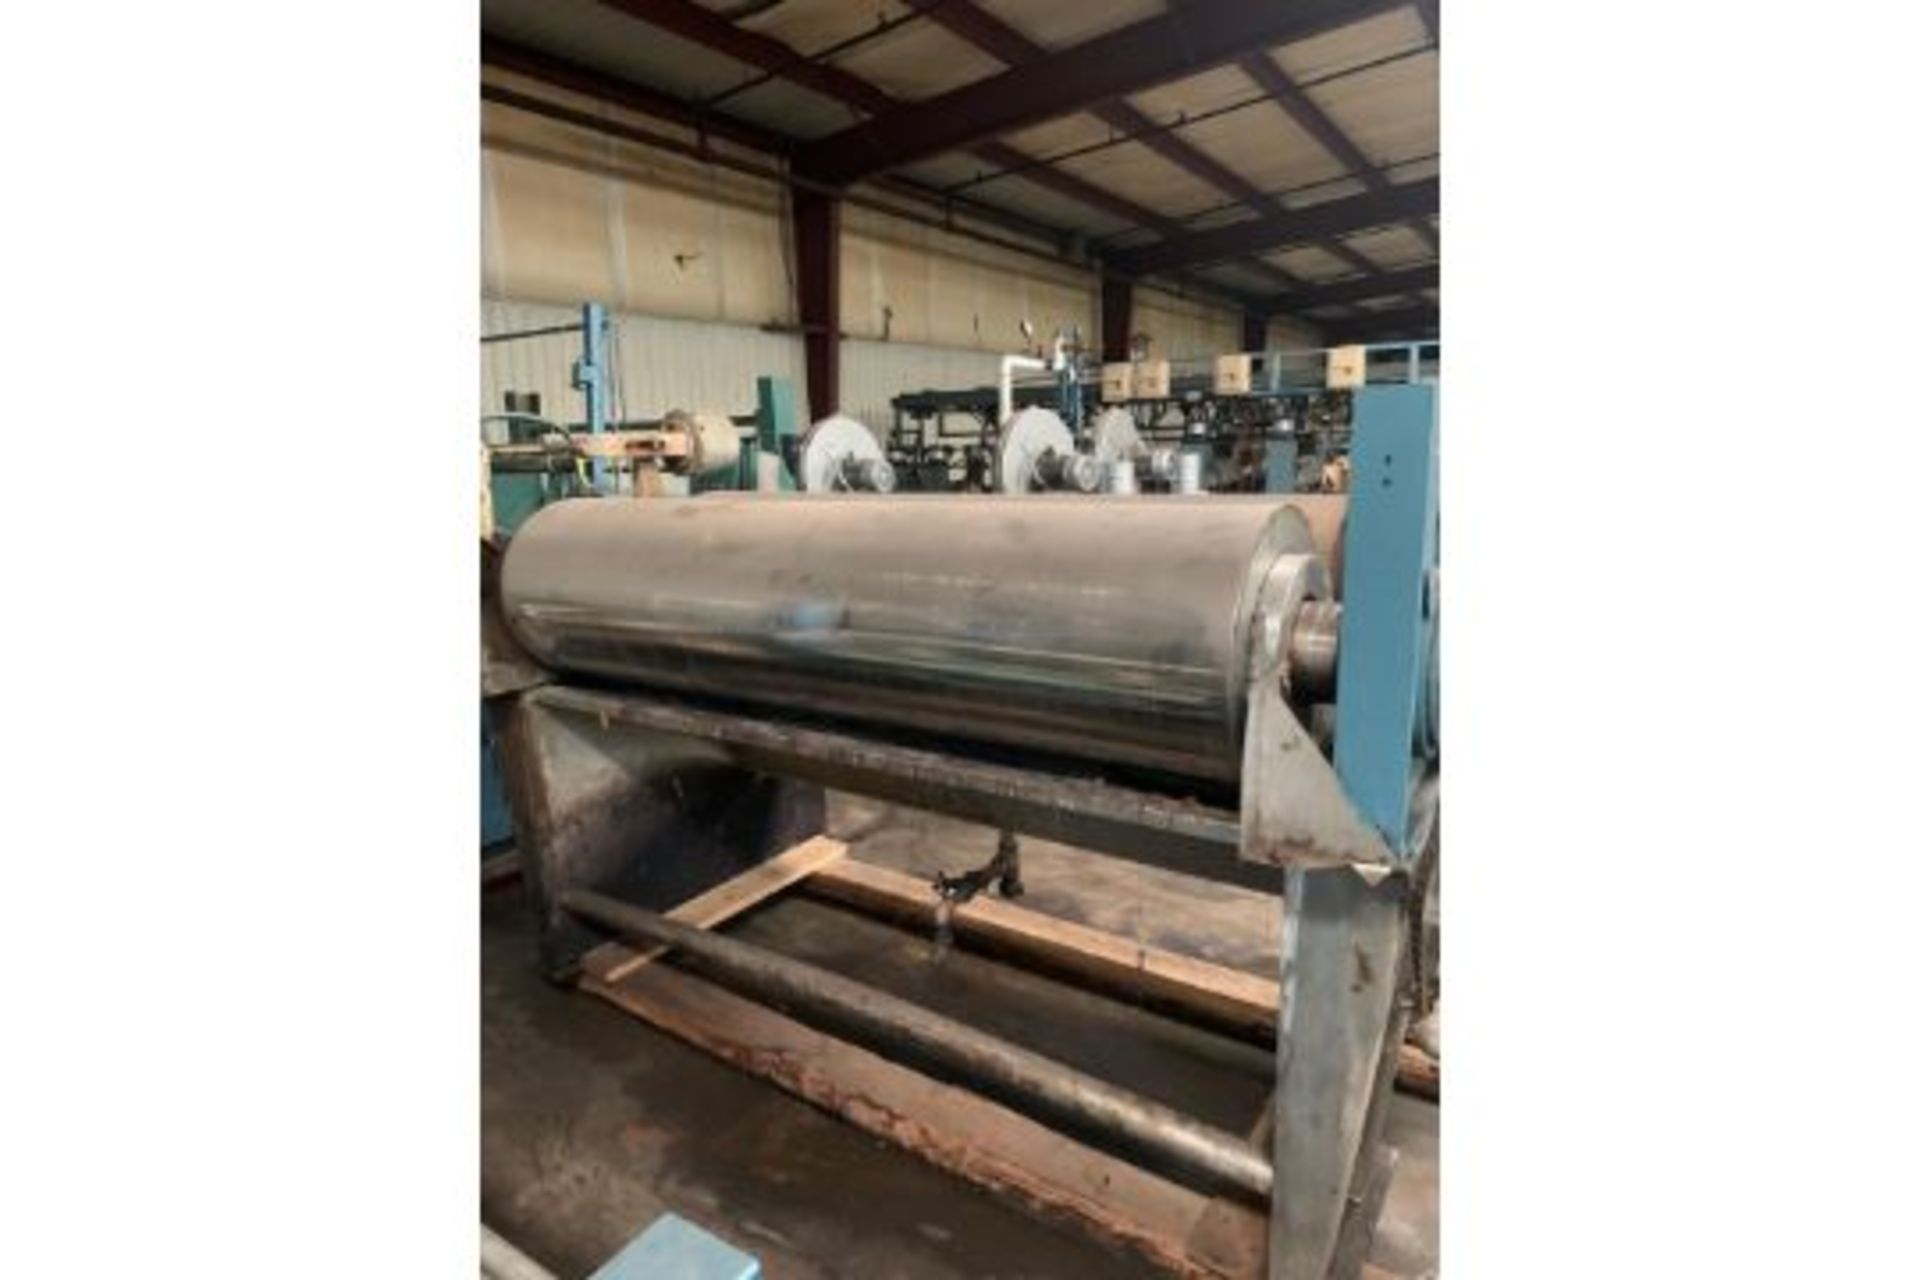 Greenville 80” Padder 2 X 18” Diameter Rolls Rubber to steel. Pneumatic Pressure Stainless Steele - Image 4 of 4